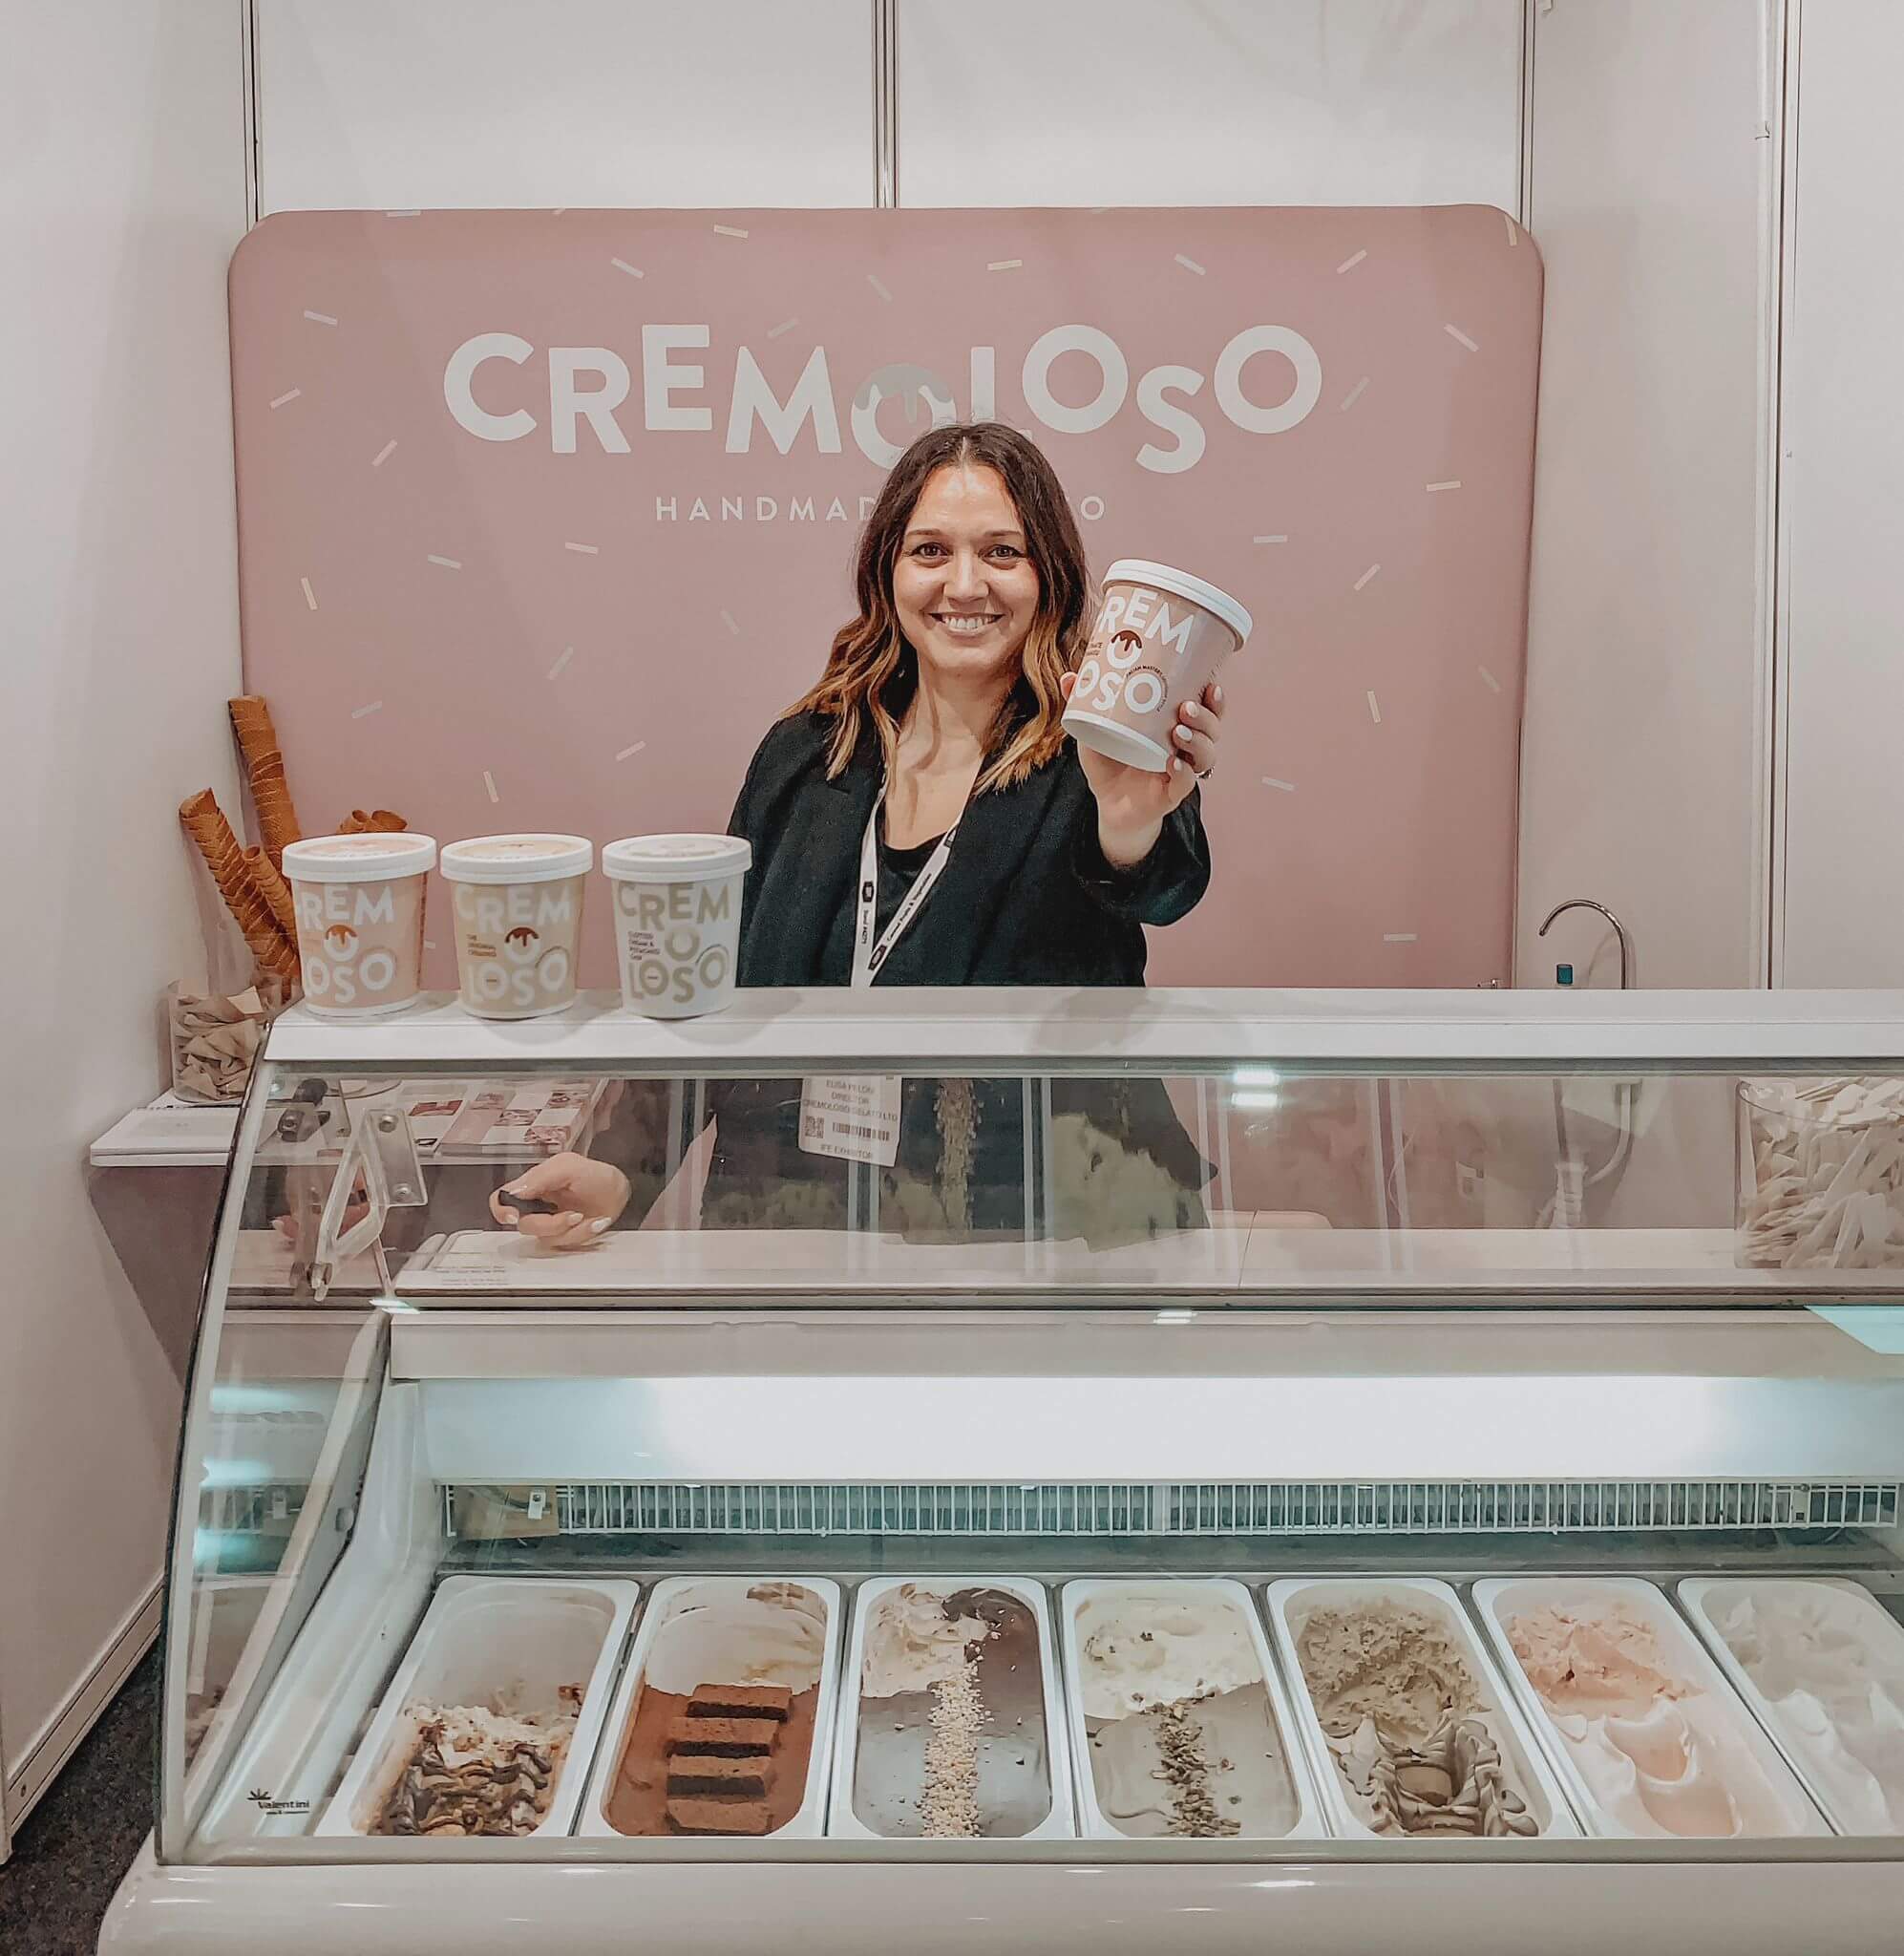 Explore the captivating world of Cremoloso Gelato at IFE24 - A journey through delicious flavors and innovative gelato creations showcased at the international food exhibition. #CremolosoGelato #IFE24 #InnovativeFlavors #GelatoArtistry #FoodExhibition"